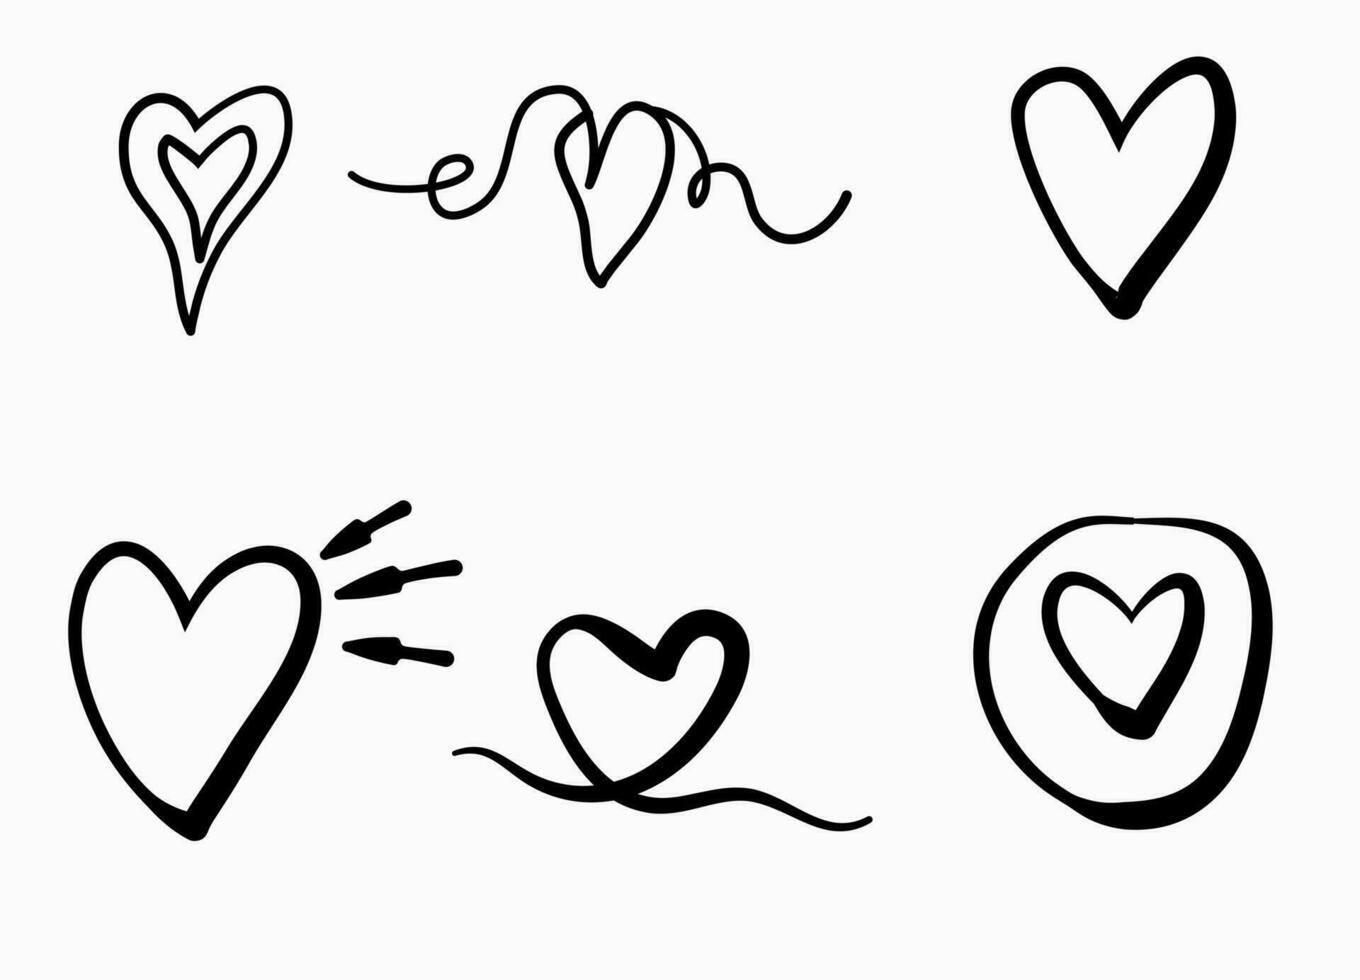 Love doodle hand drawn vector